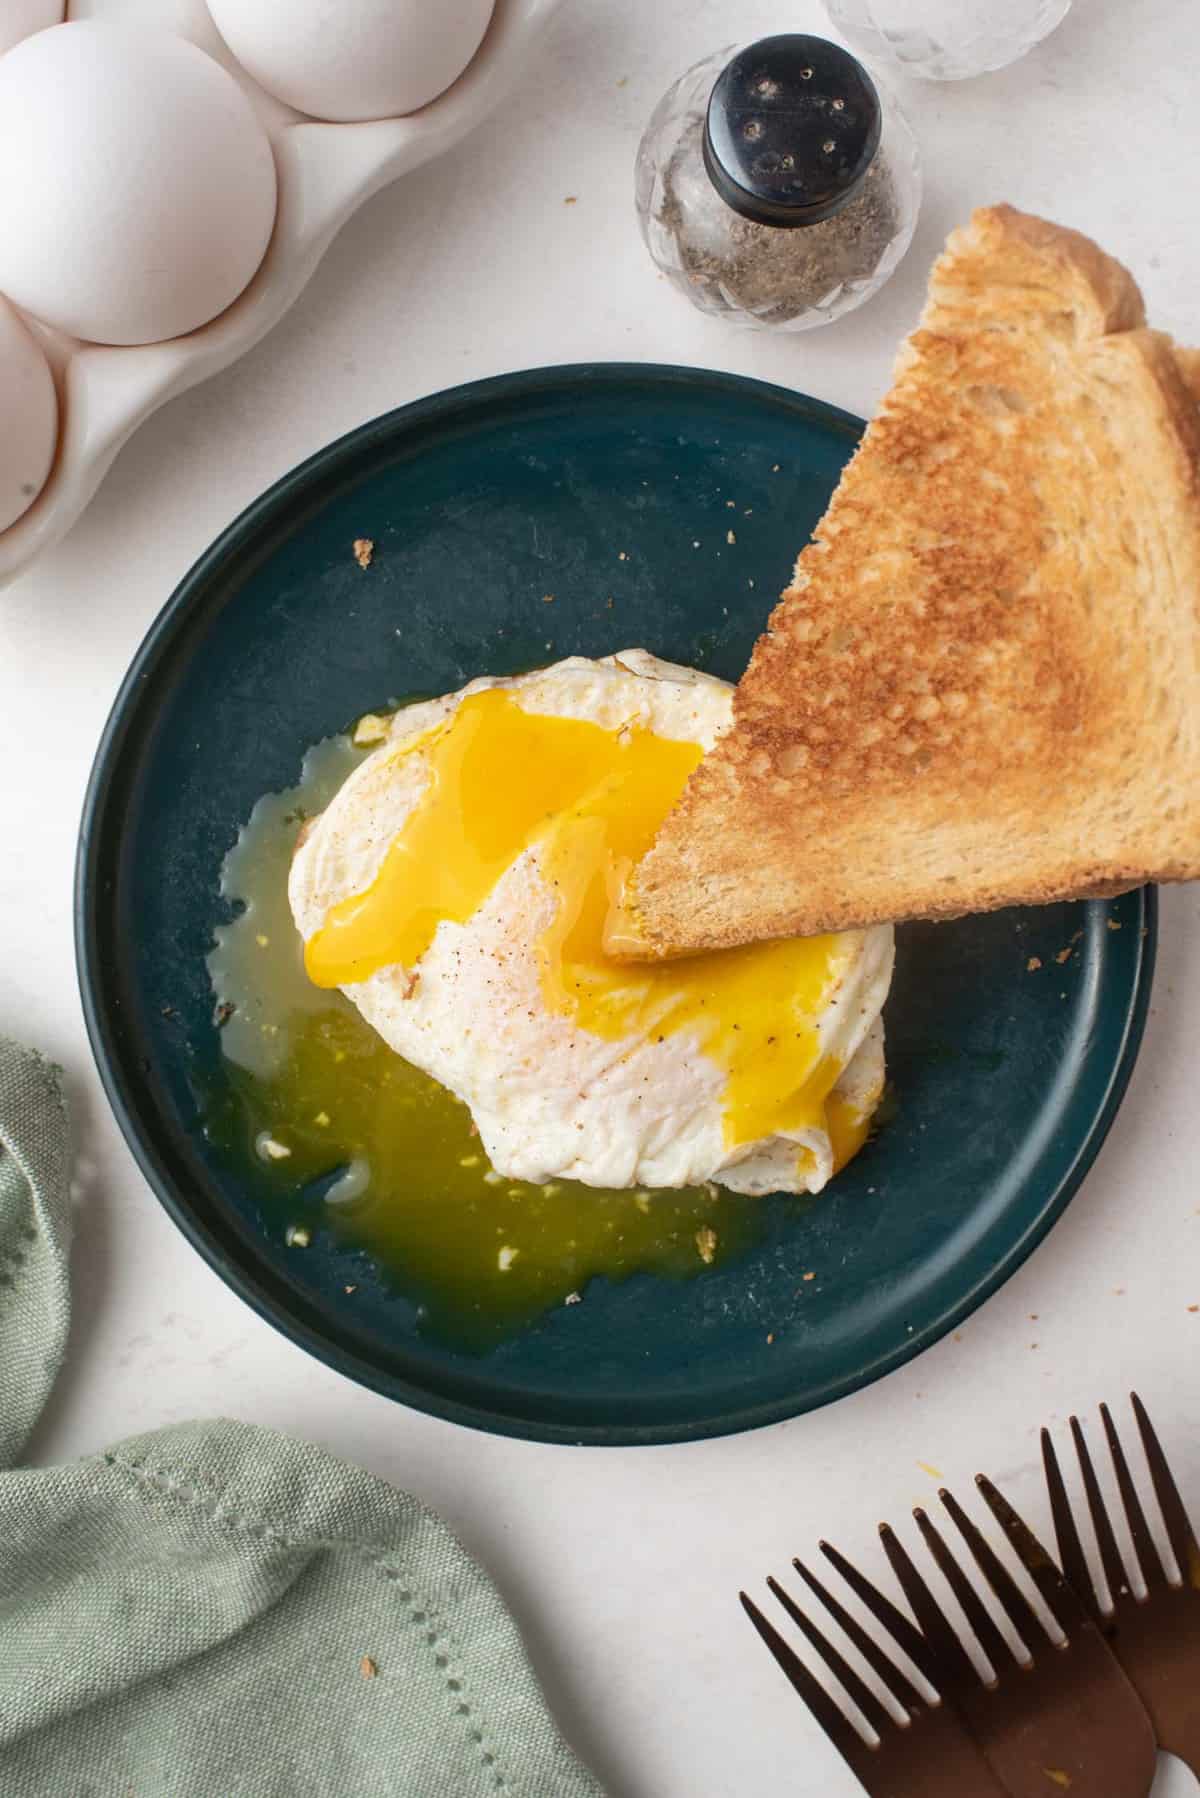 Triangle of toast being dipped in a runny egg.